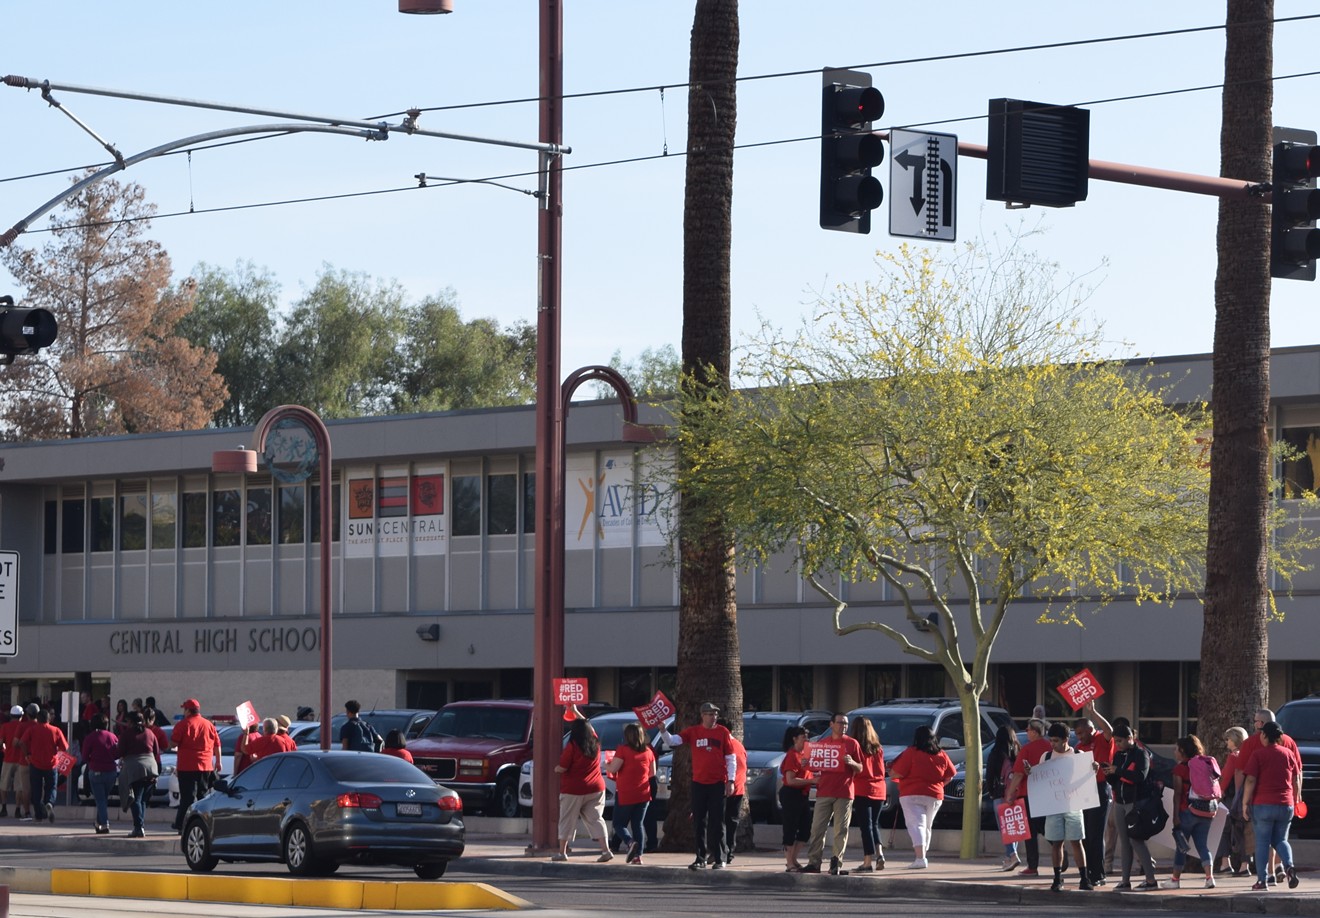 Like thousands of others across the state, educators at Central High School in Phoenix staged a "walk-in" protest on Wednesday morning in the lead-up to a possible teacher strike.